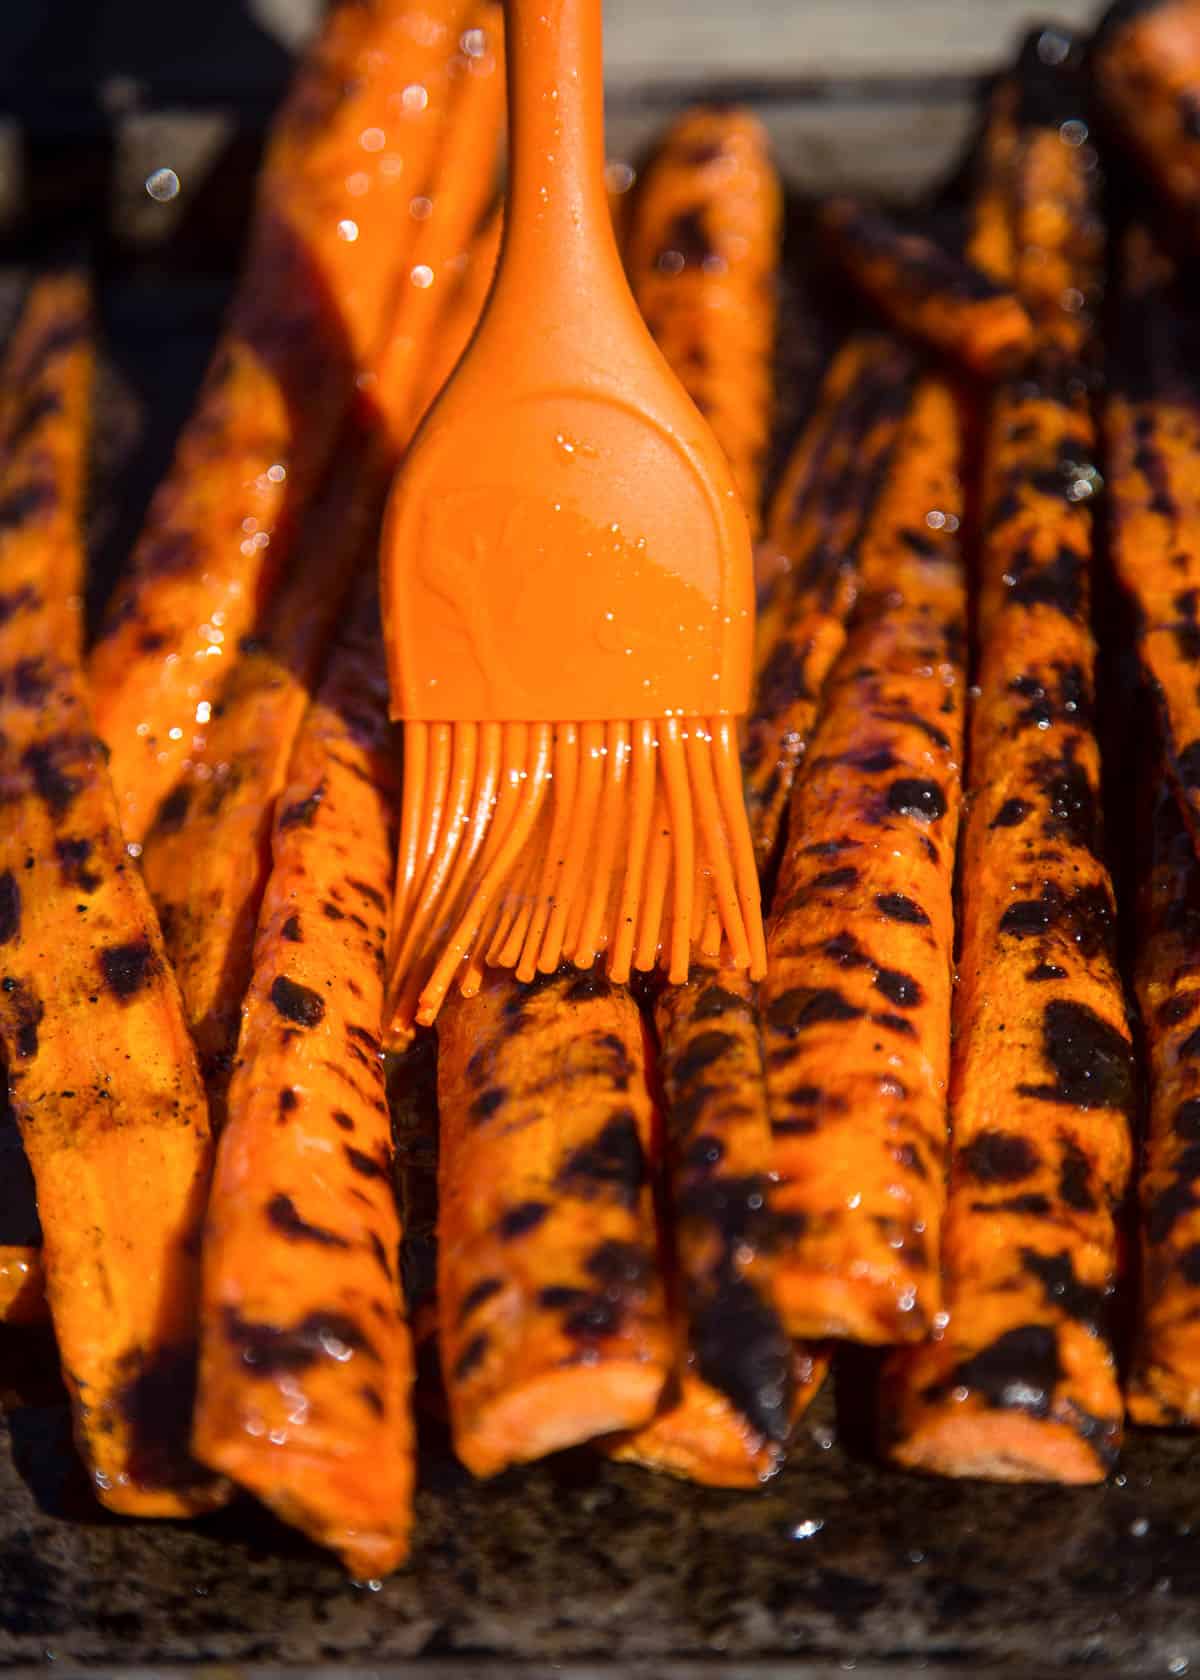 Drizzling grilled carrots with a sweet glaze